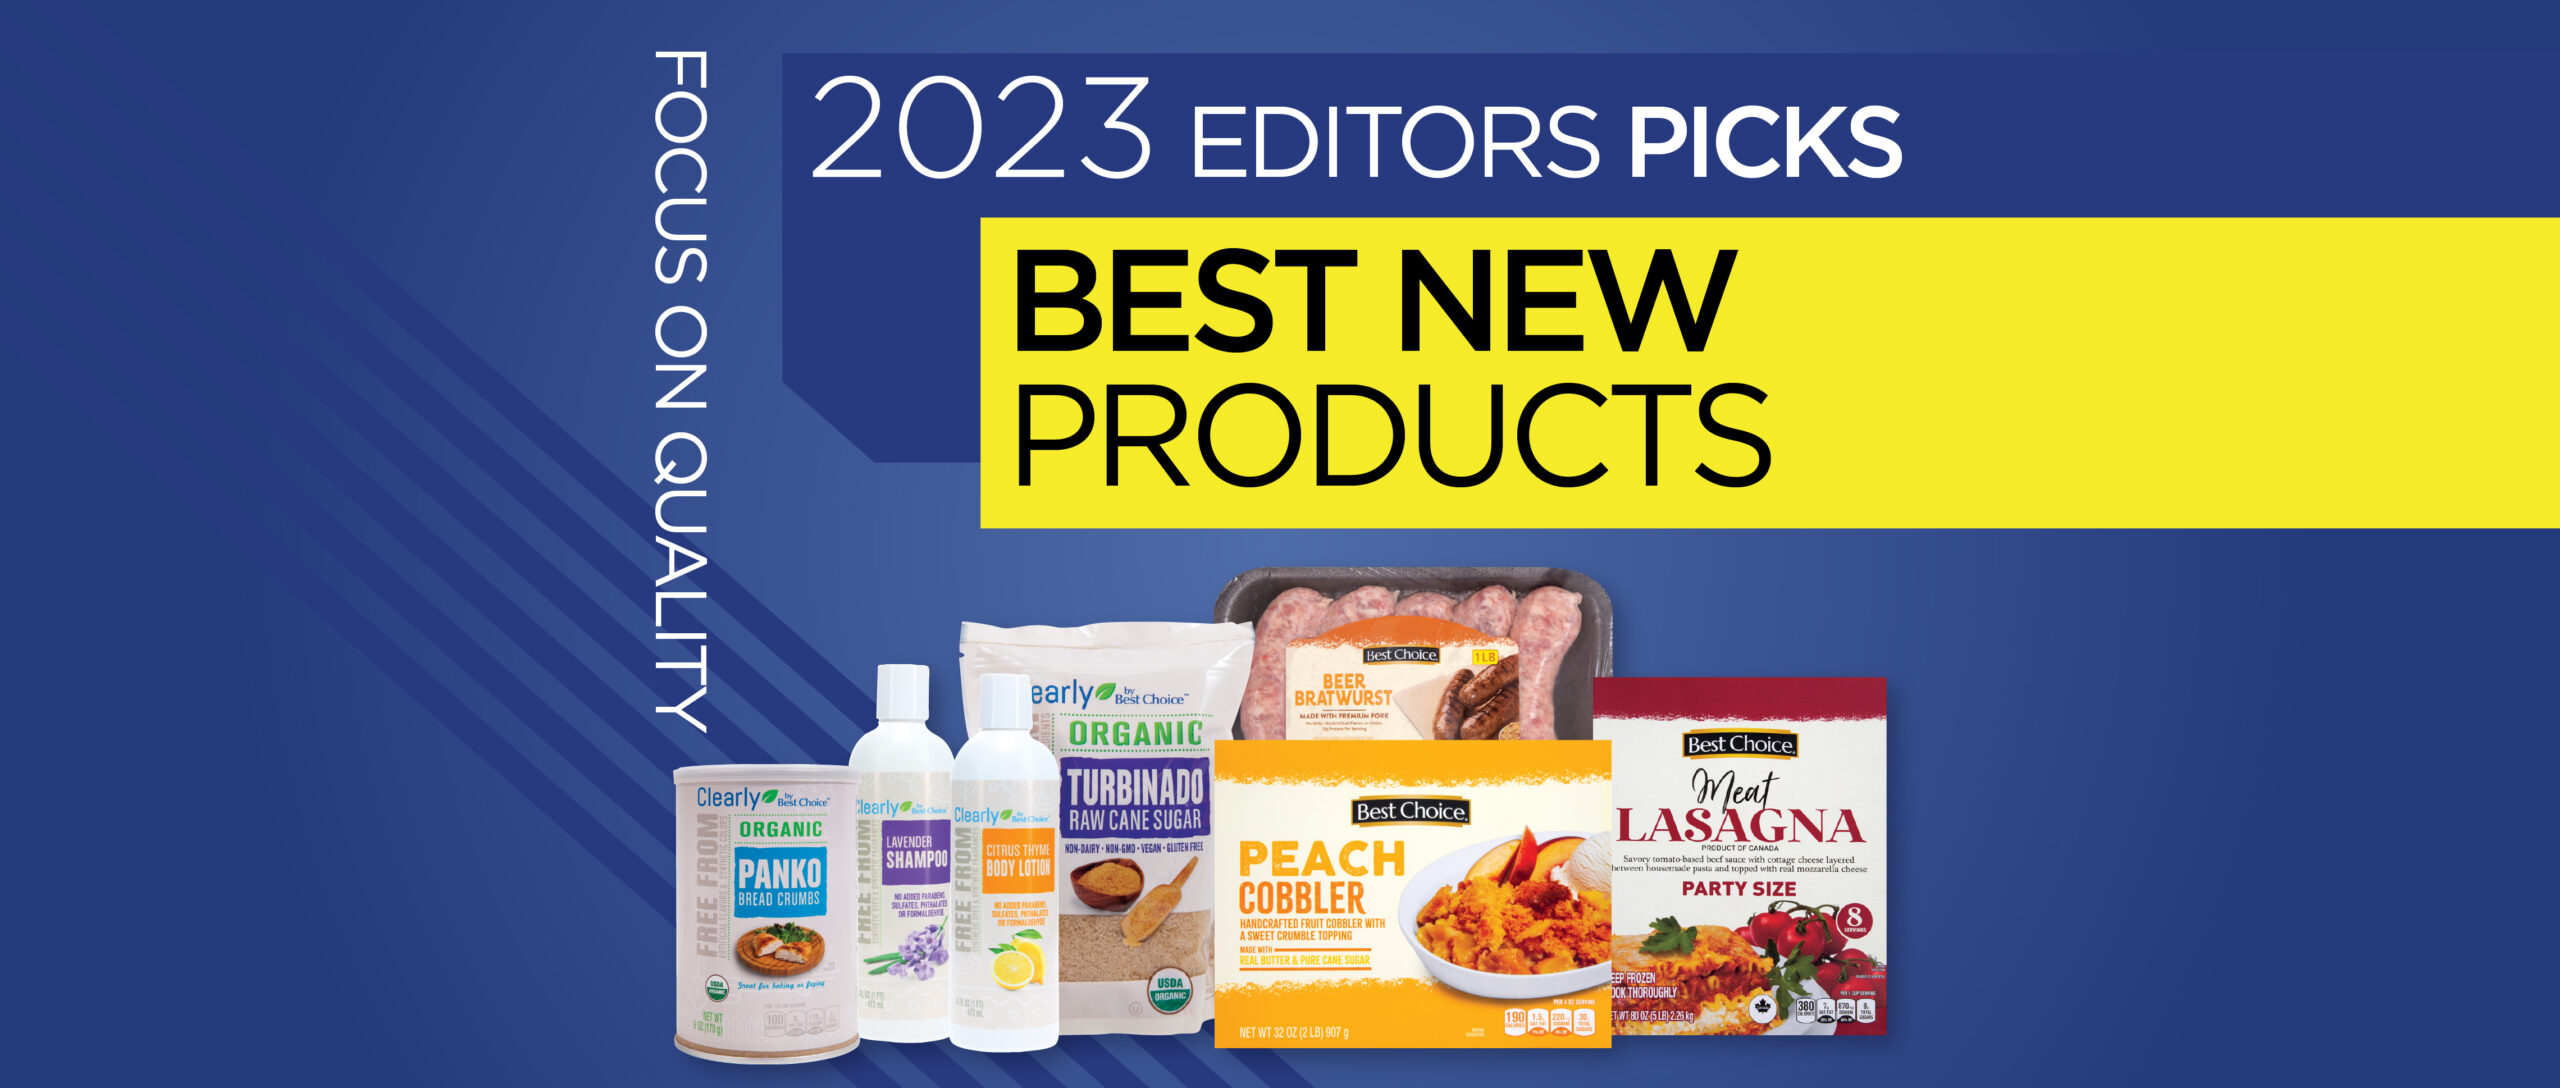 Best New Products Awards 2023